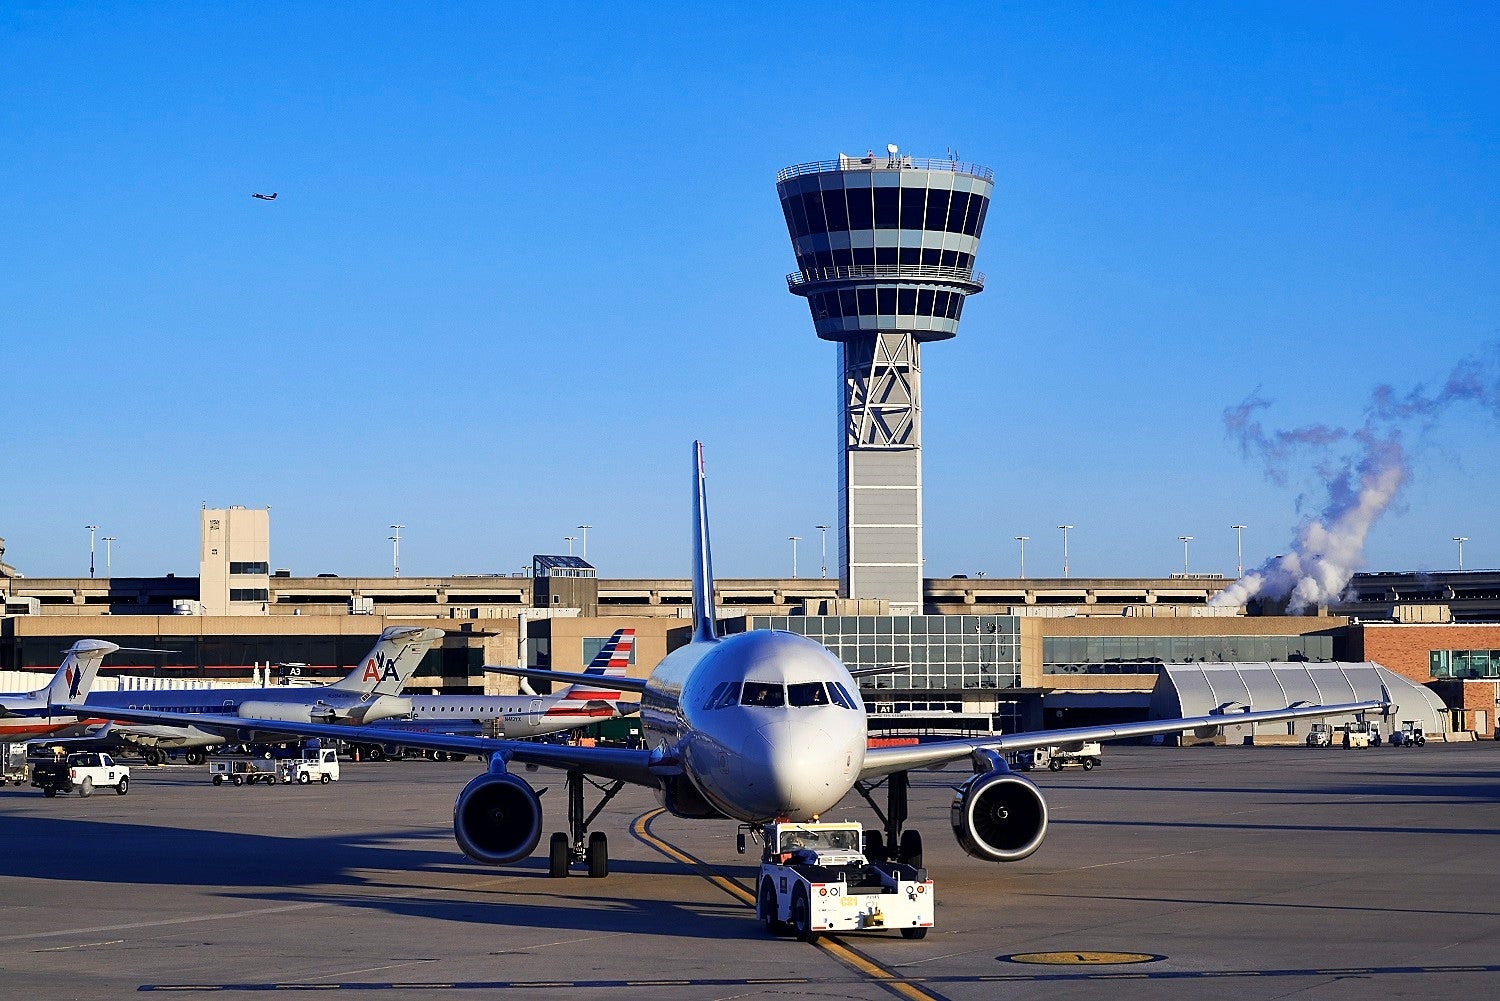 Terminal and control tower at Philadelphia airport